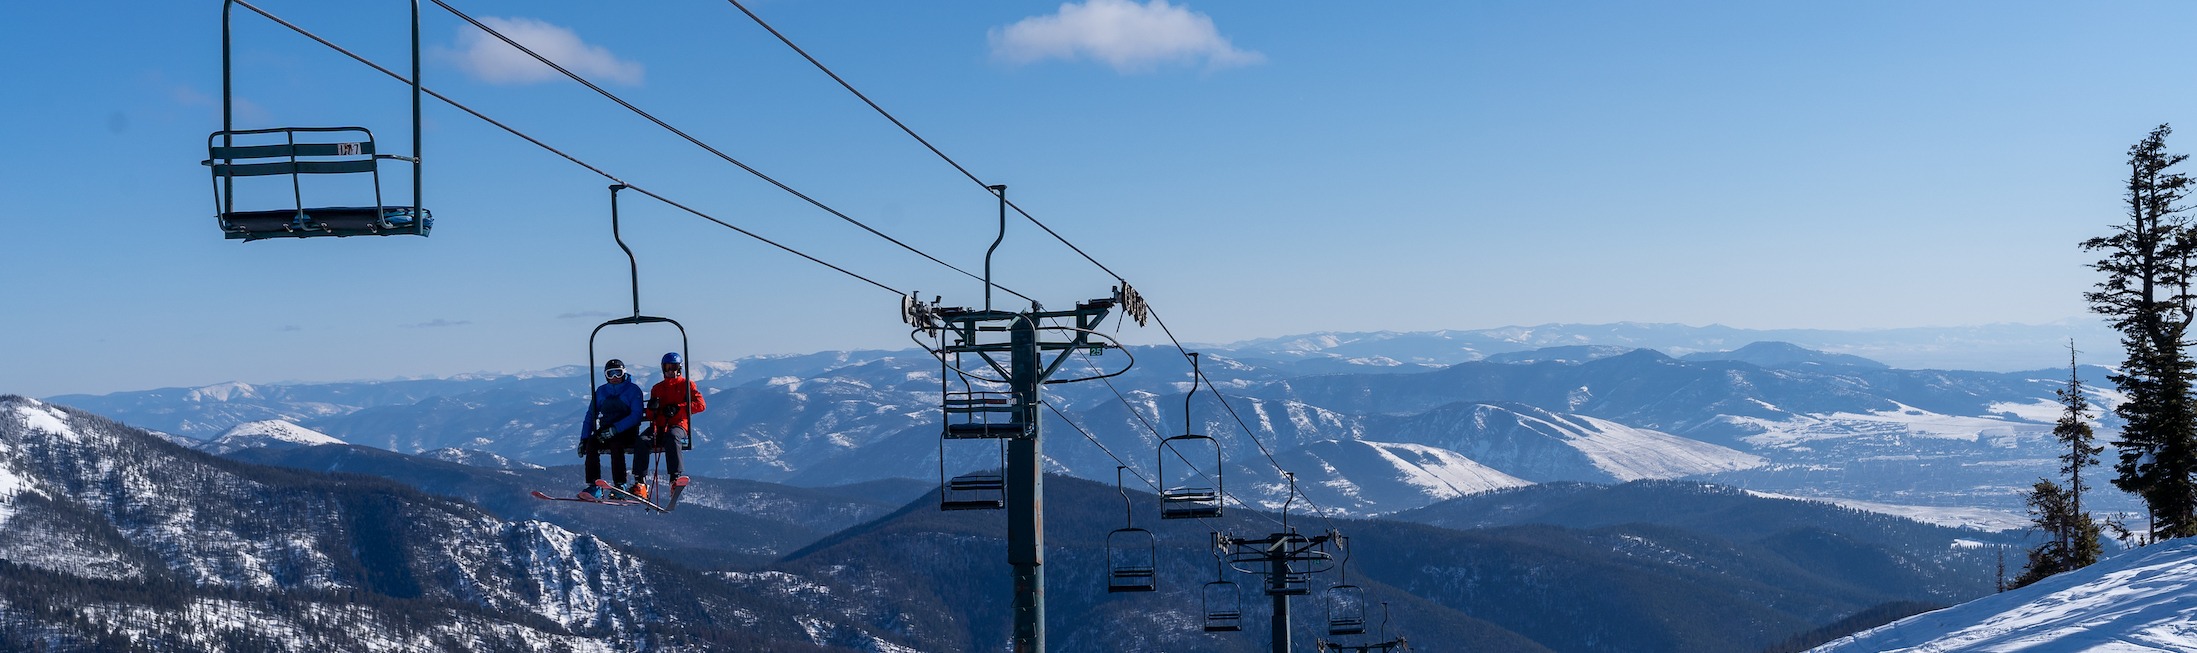 Our Top Three Ski Experiences in Missoula